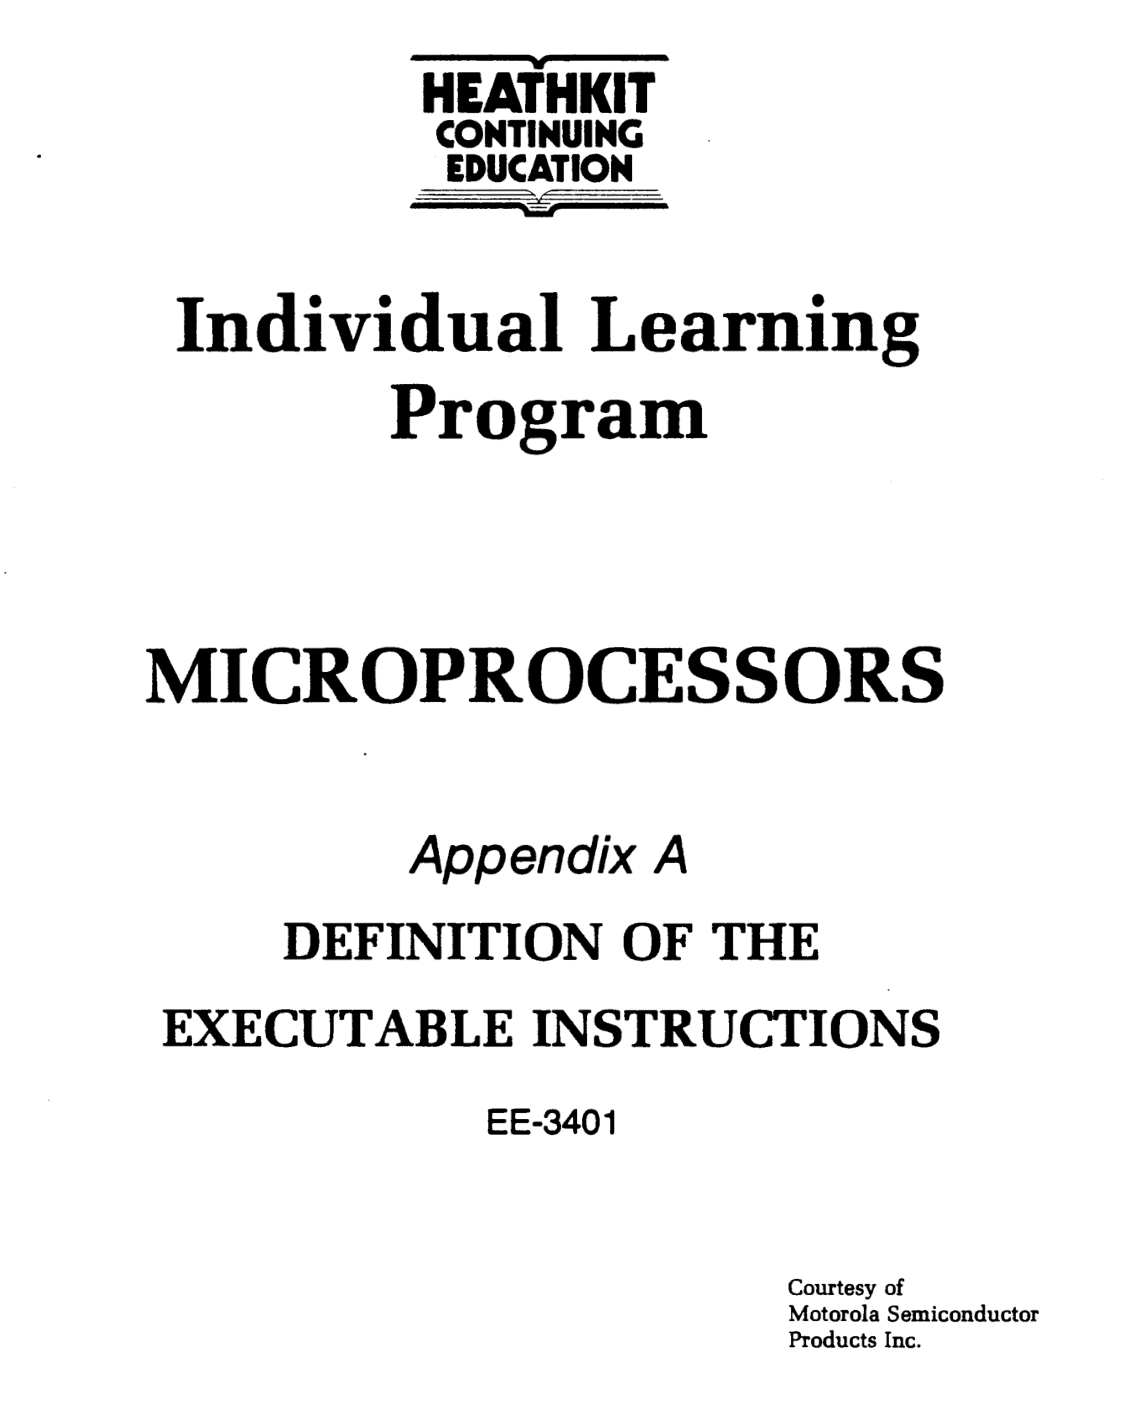 Heathkit EE-3401 Individual Learning Program - Appendix A - Definition of the Executable Instructions